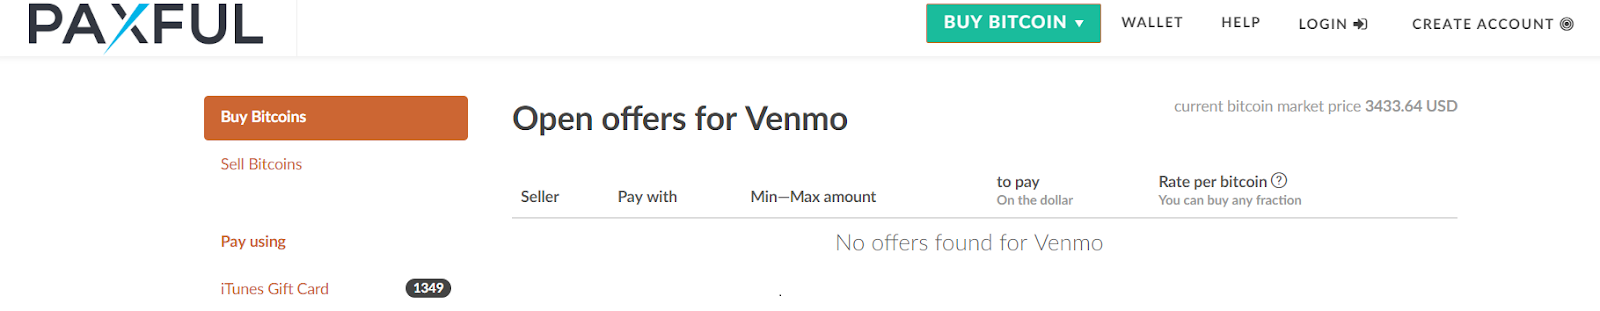 How To Buy Bitcoin With Venmo Step By Step With Photos Bitcoin - 